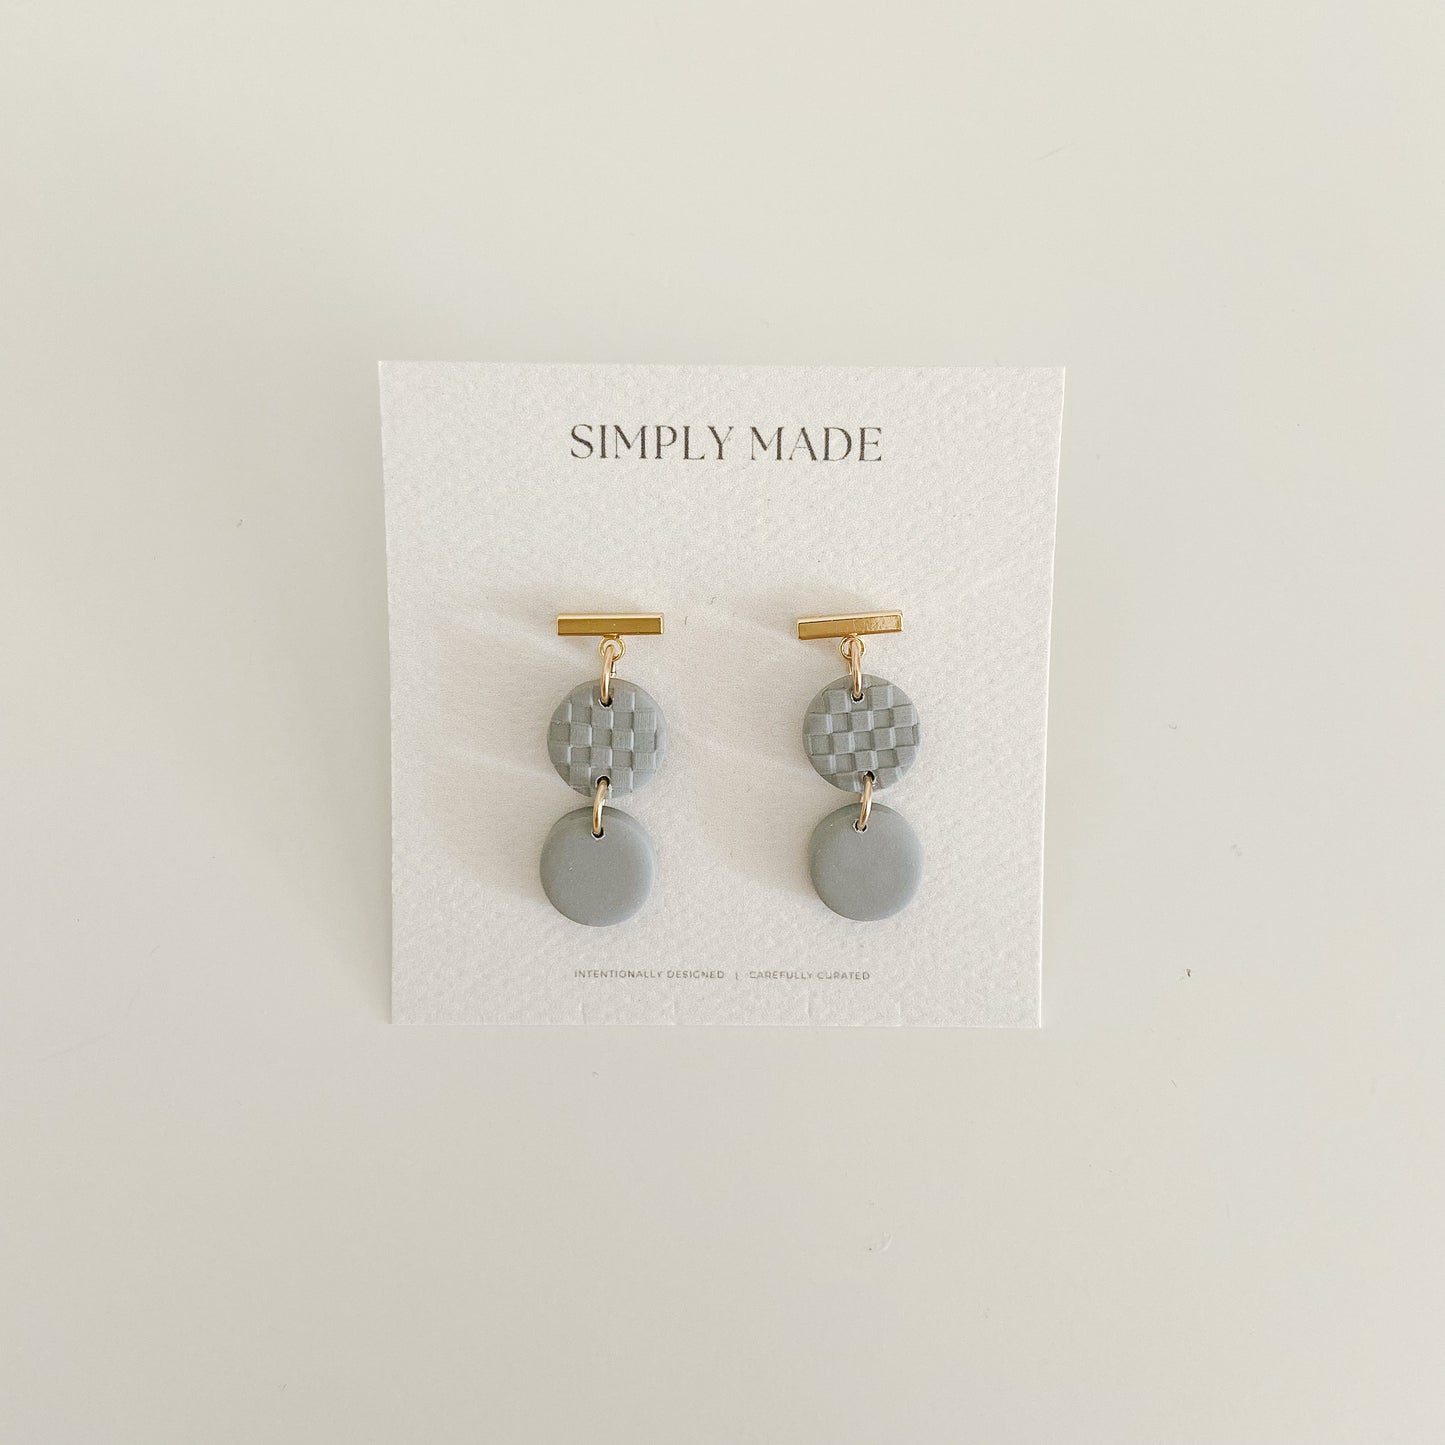 Checkered #4 — clay earrings